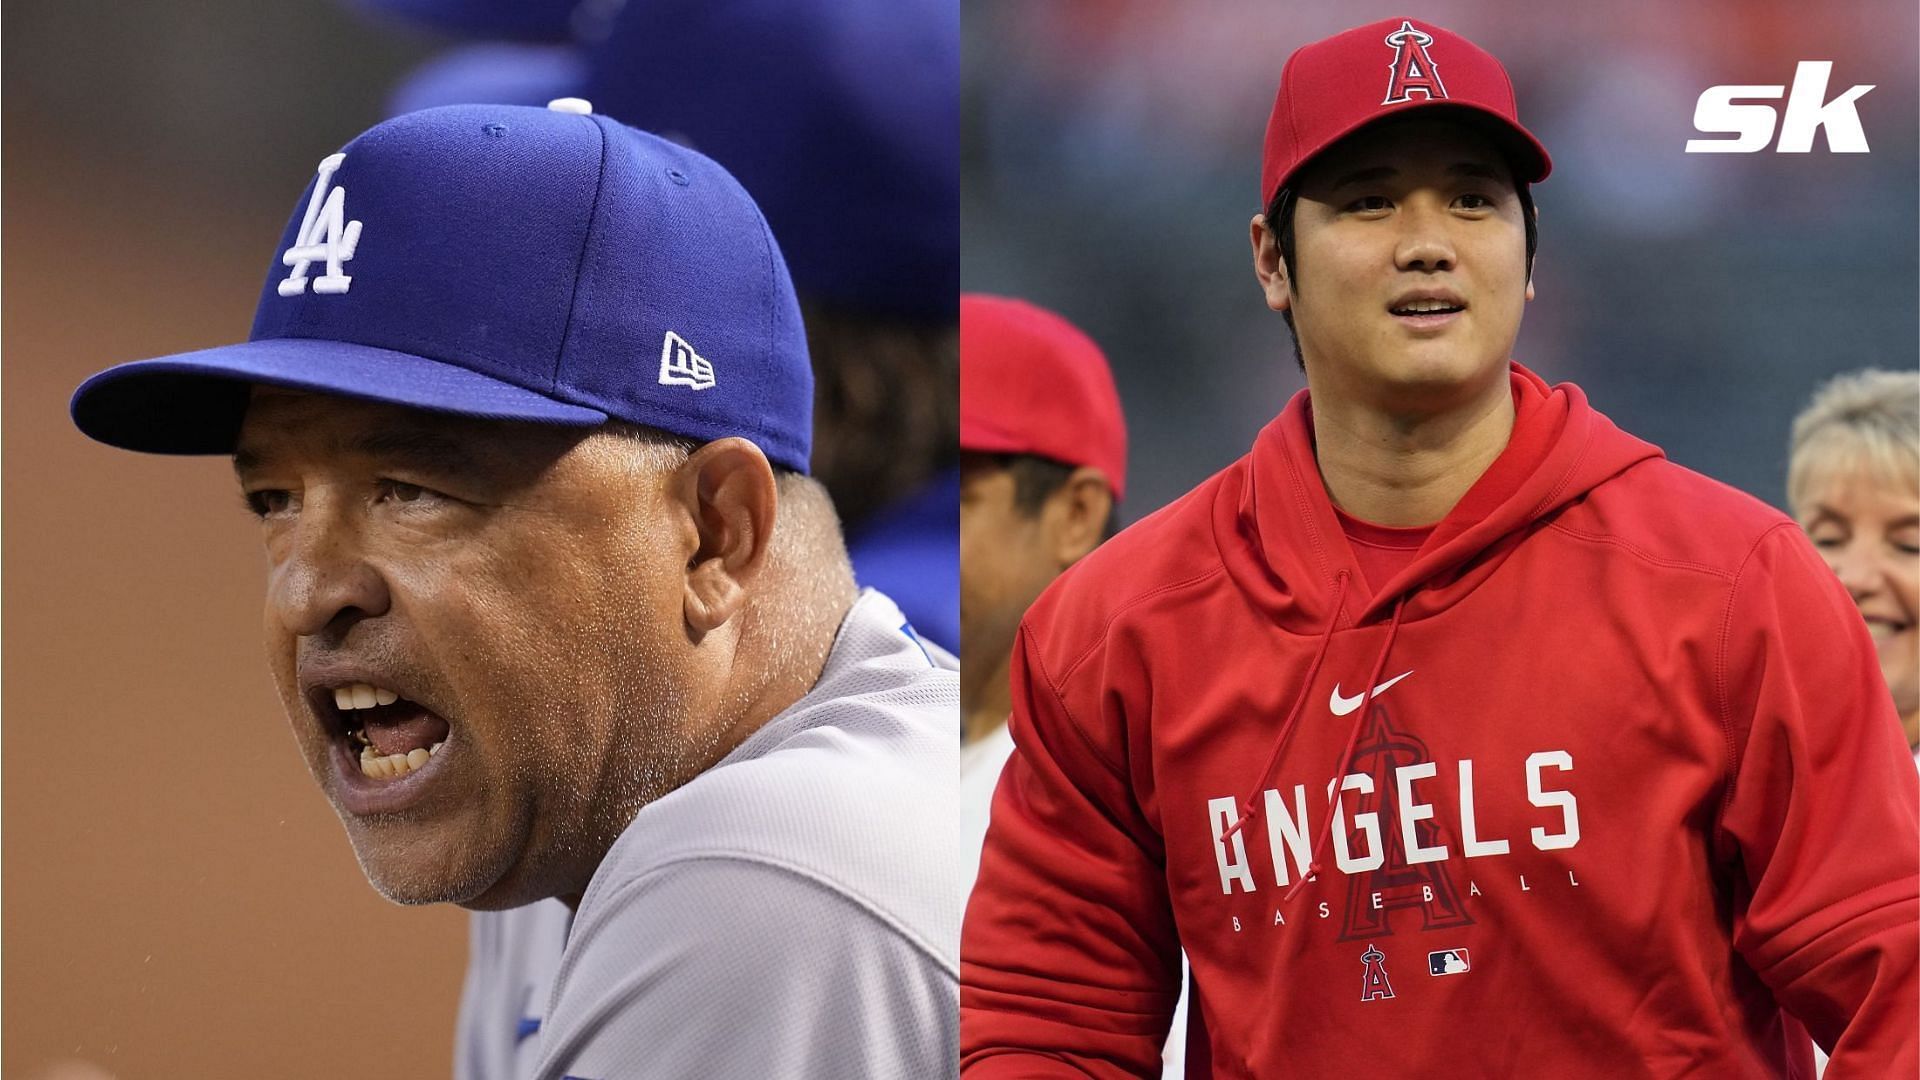 Some believe that the Los Angeles Dodgers will need more than Shohei Ohtani to contend next season